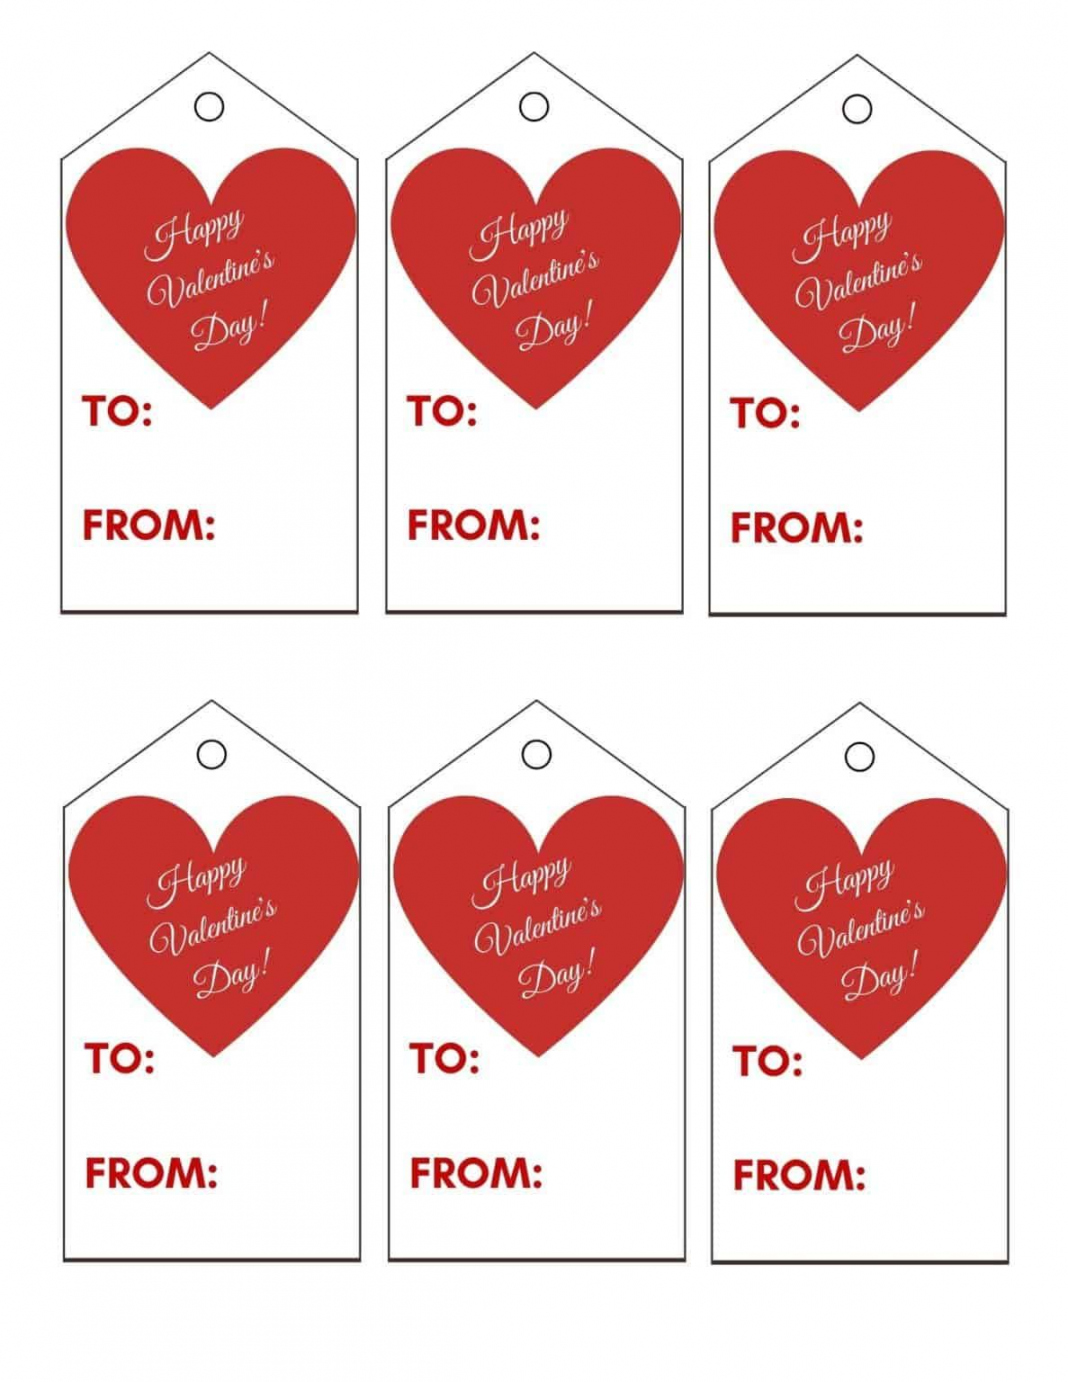 Pin on Paper Crafting - FREE Printables - Free Printable Valentine Tags